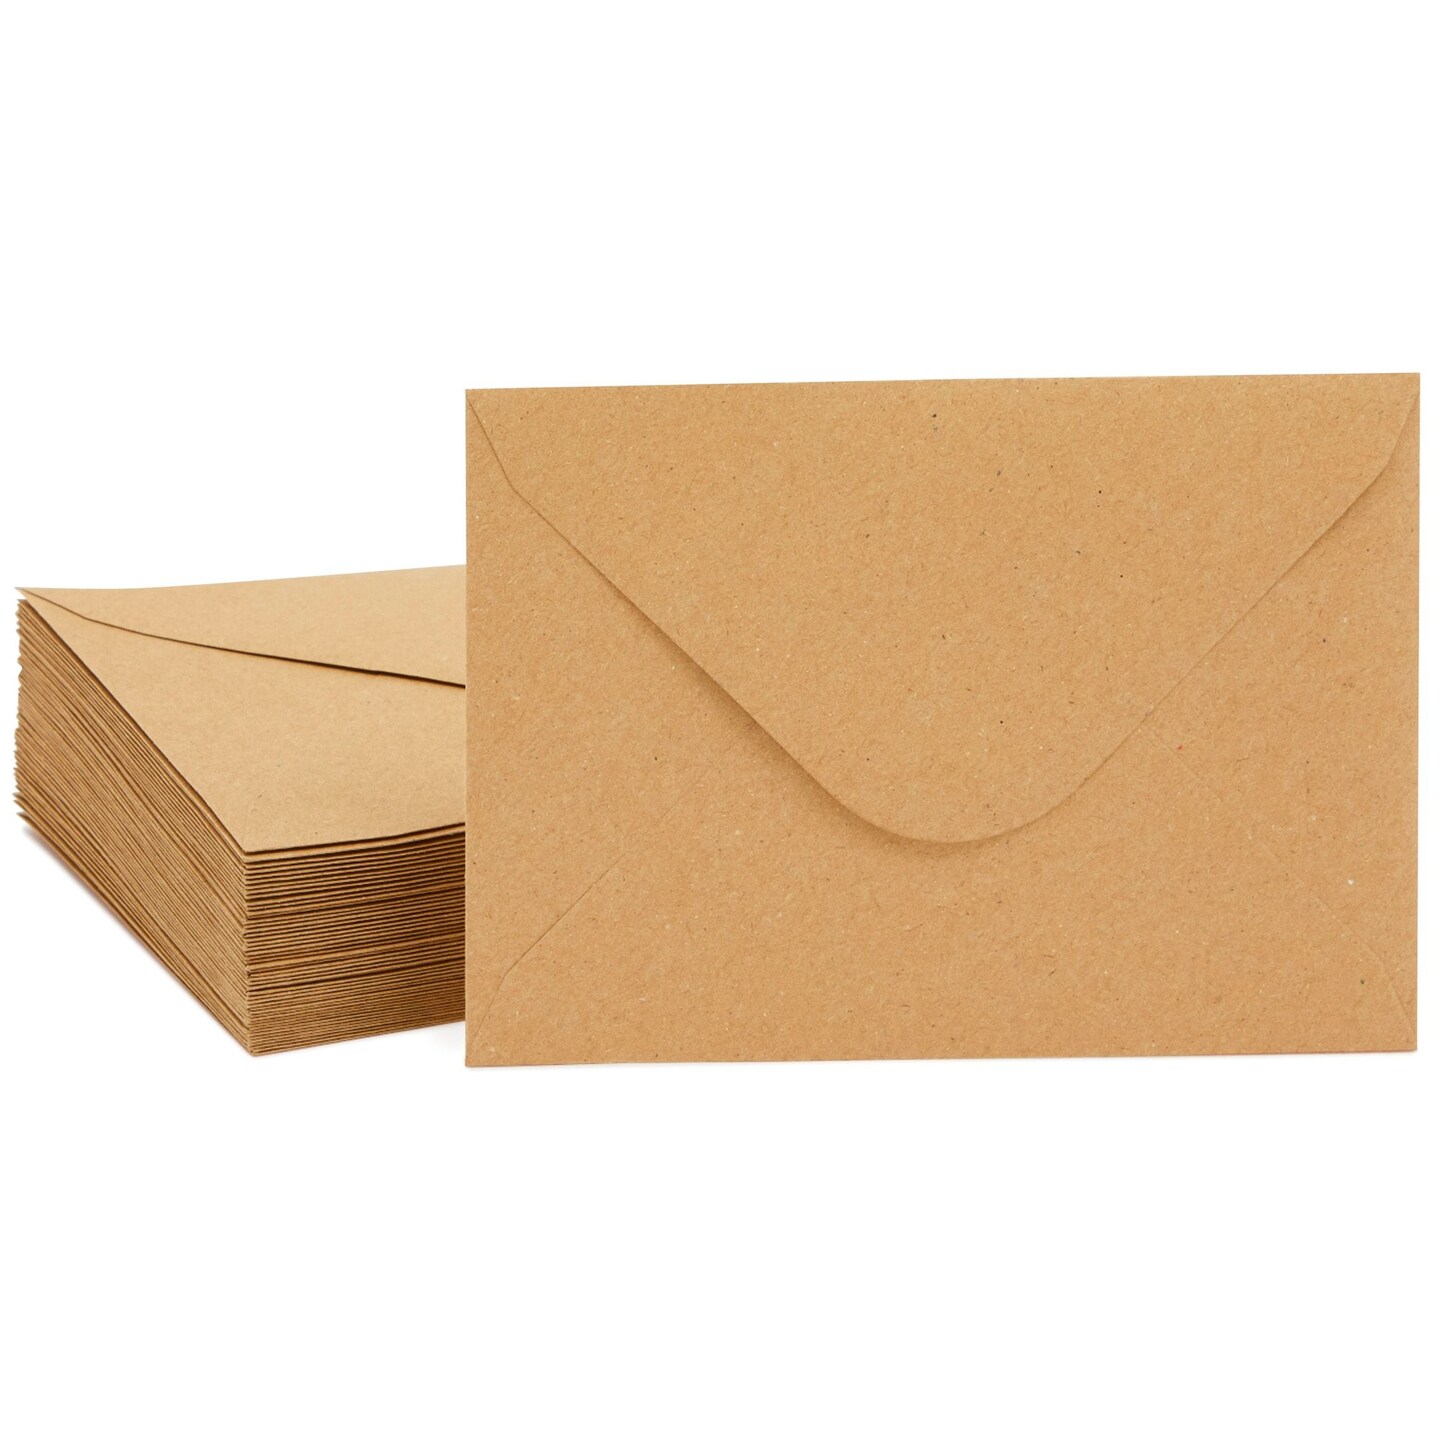 Kraft Paper Invitation Envelopes 4x6 for Wedding, Baby Shower, Thank You Cards, Special Occasions - A6 V Flap Brown Envelopes (50 Pack)